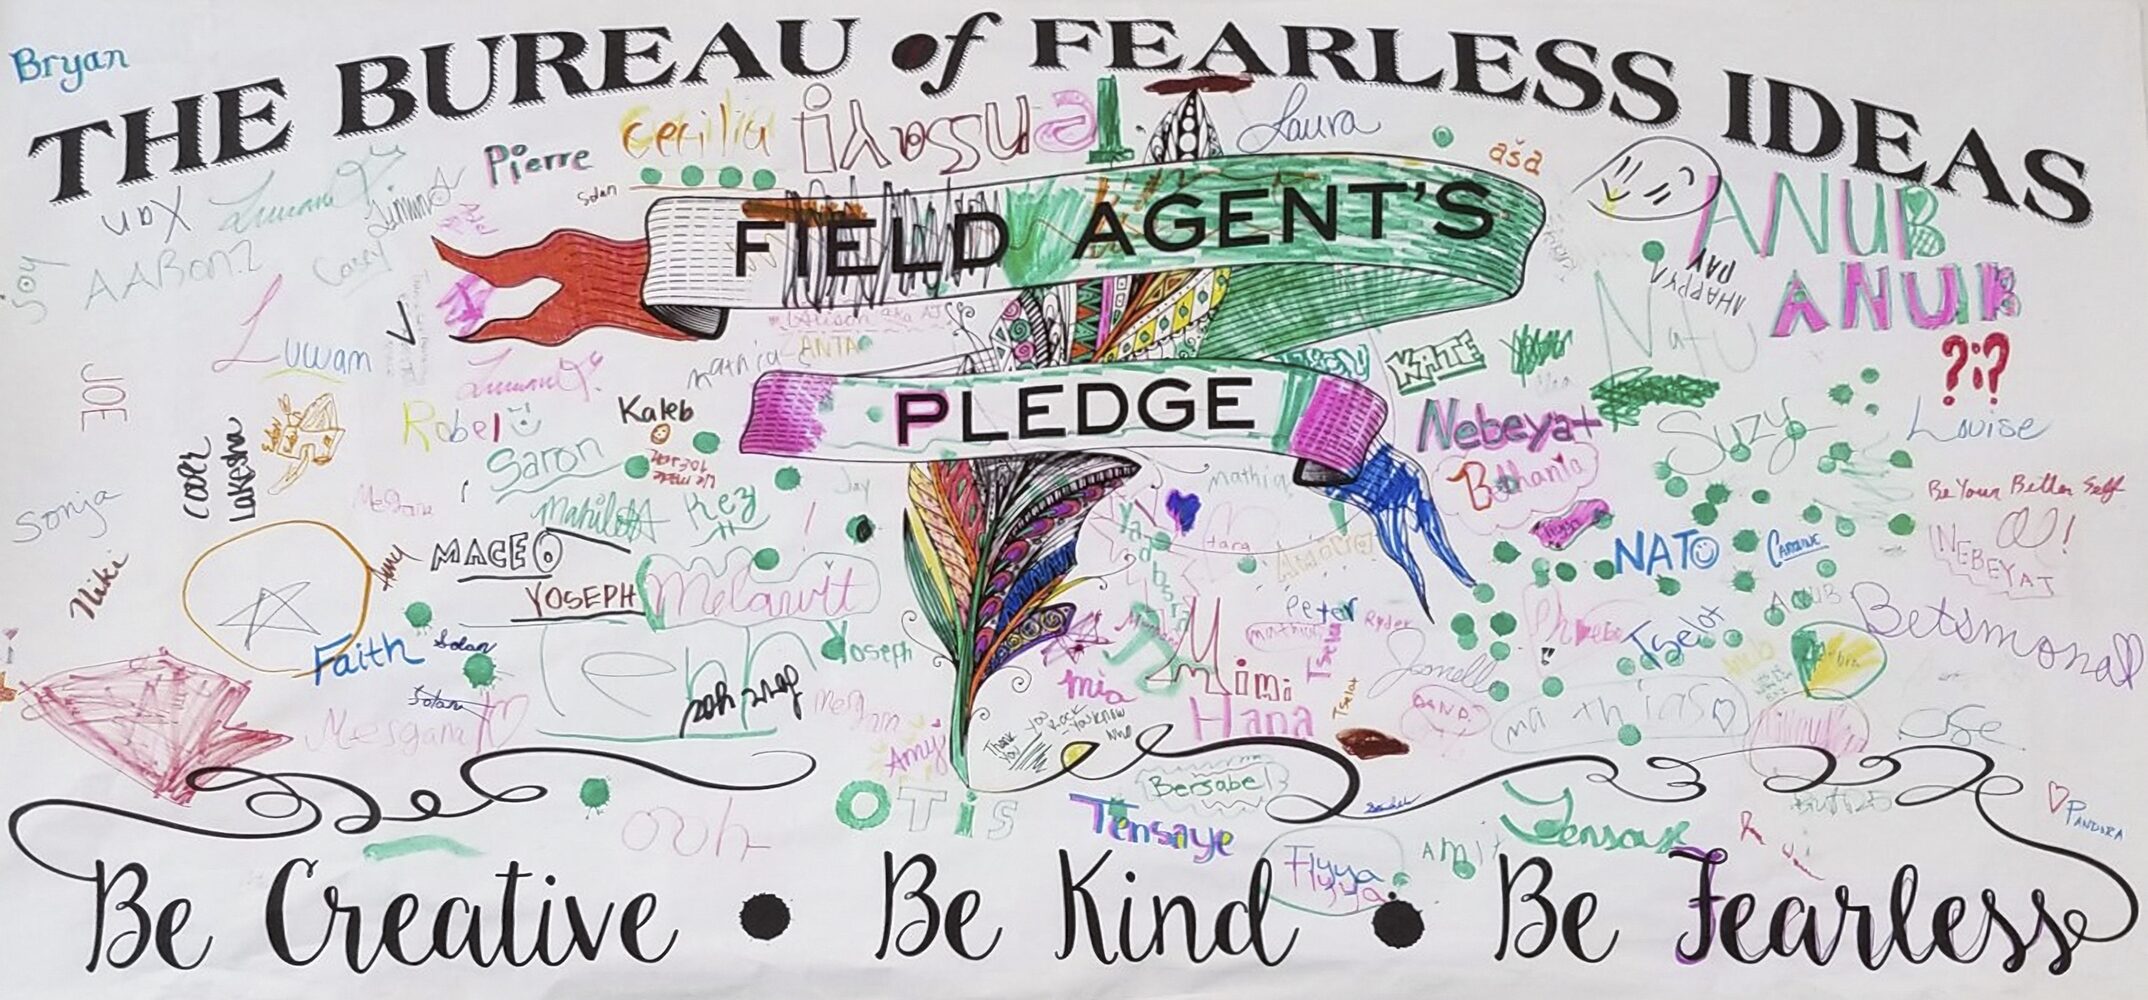 A banner
hanging inside the Bureau of Fearless Ideas broadcasts the pledge that every
student makes when they join the program: Be creative. Be kind. Be fearless.